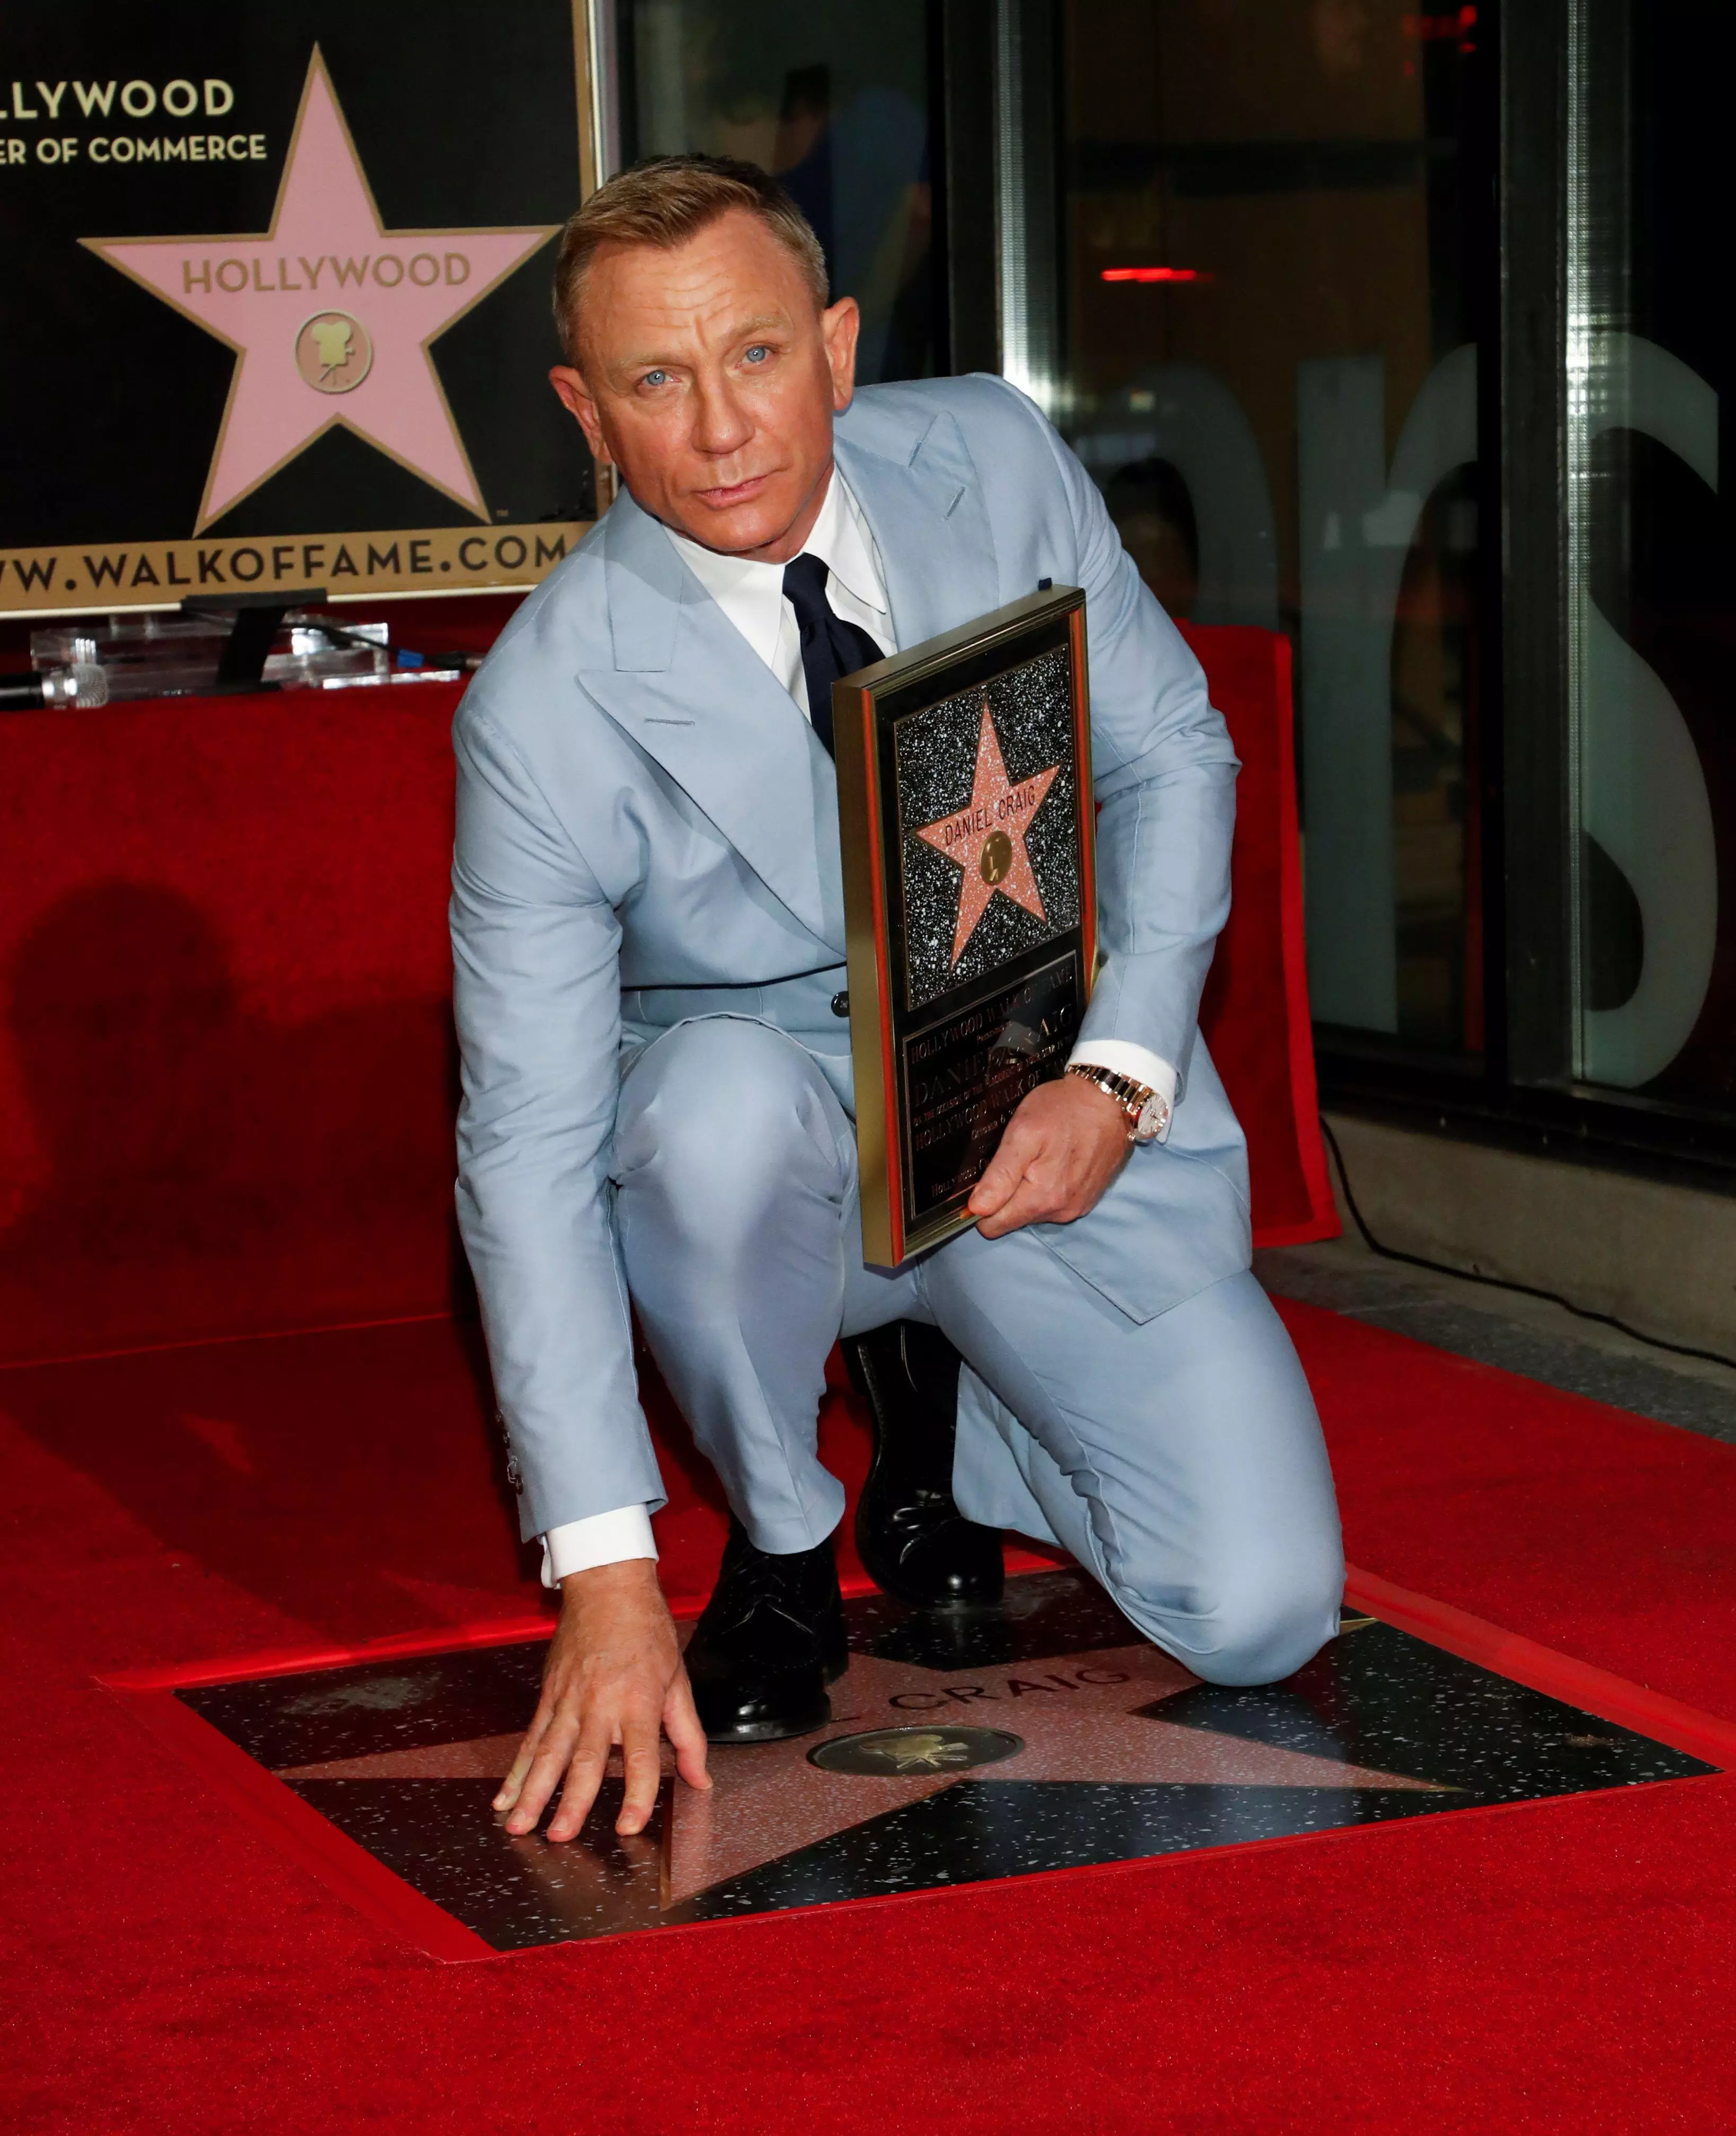 Daniel Craig poses after unveiling his star on the Hollywood Walk of Fame.